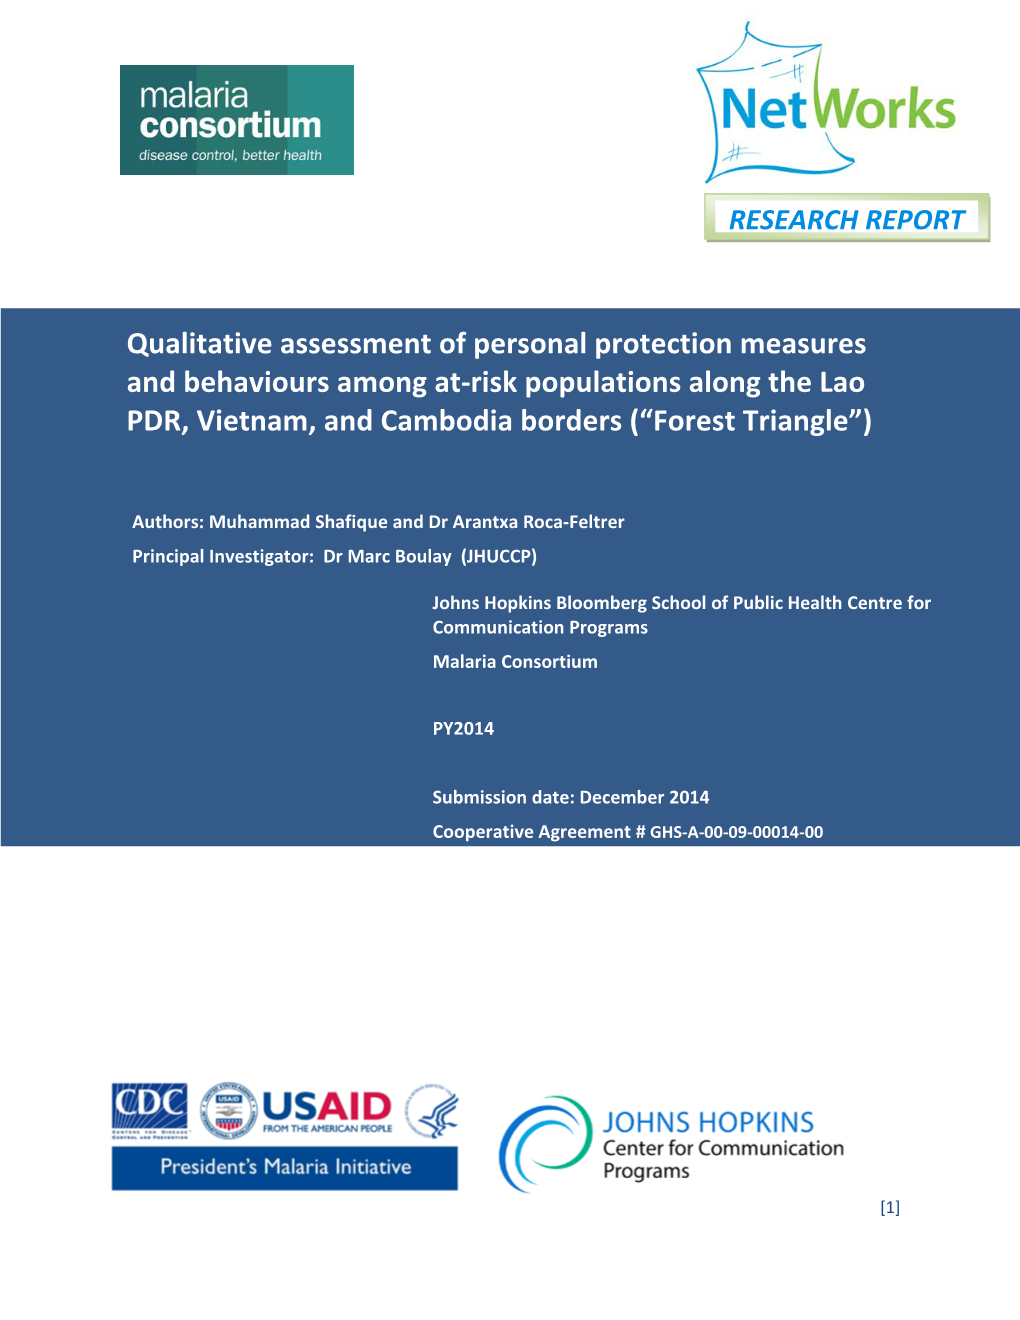 Qualitative Assessment of Personal Protection Measures and Behaviours Among At-Risk Populations Along the Lao PDR, Vietnam, and Cambodia Borders (“Forest Triangle”)